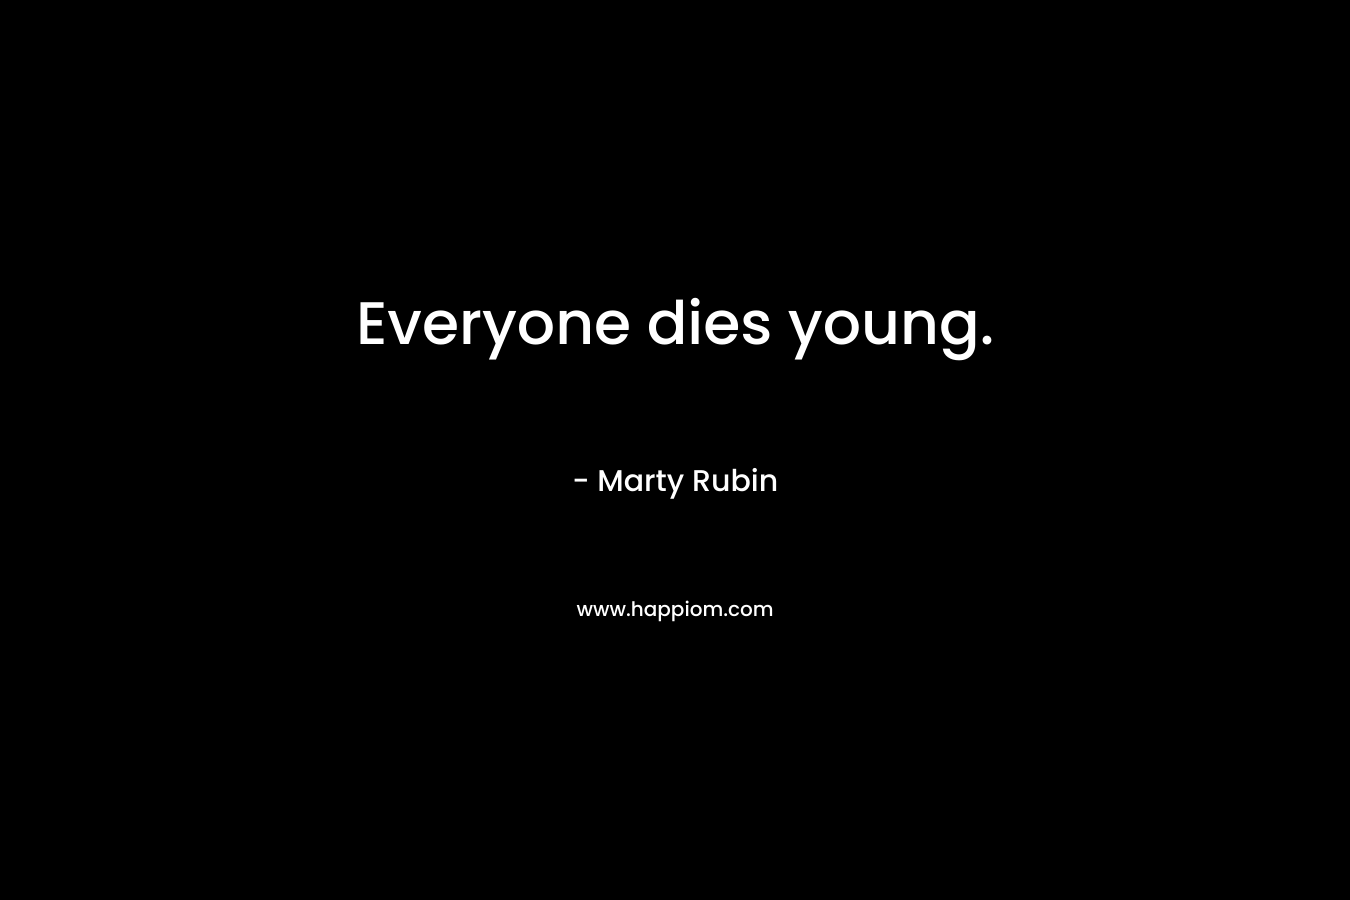 Everyone dies young.